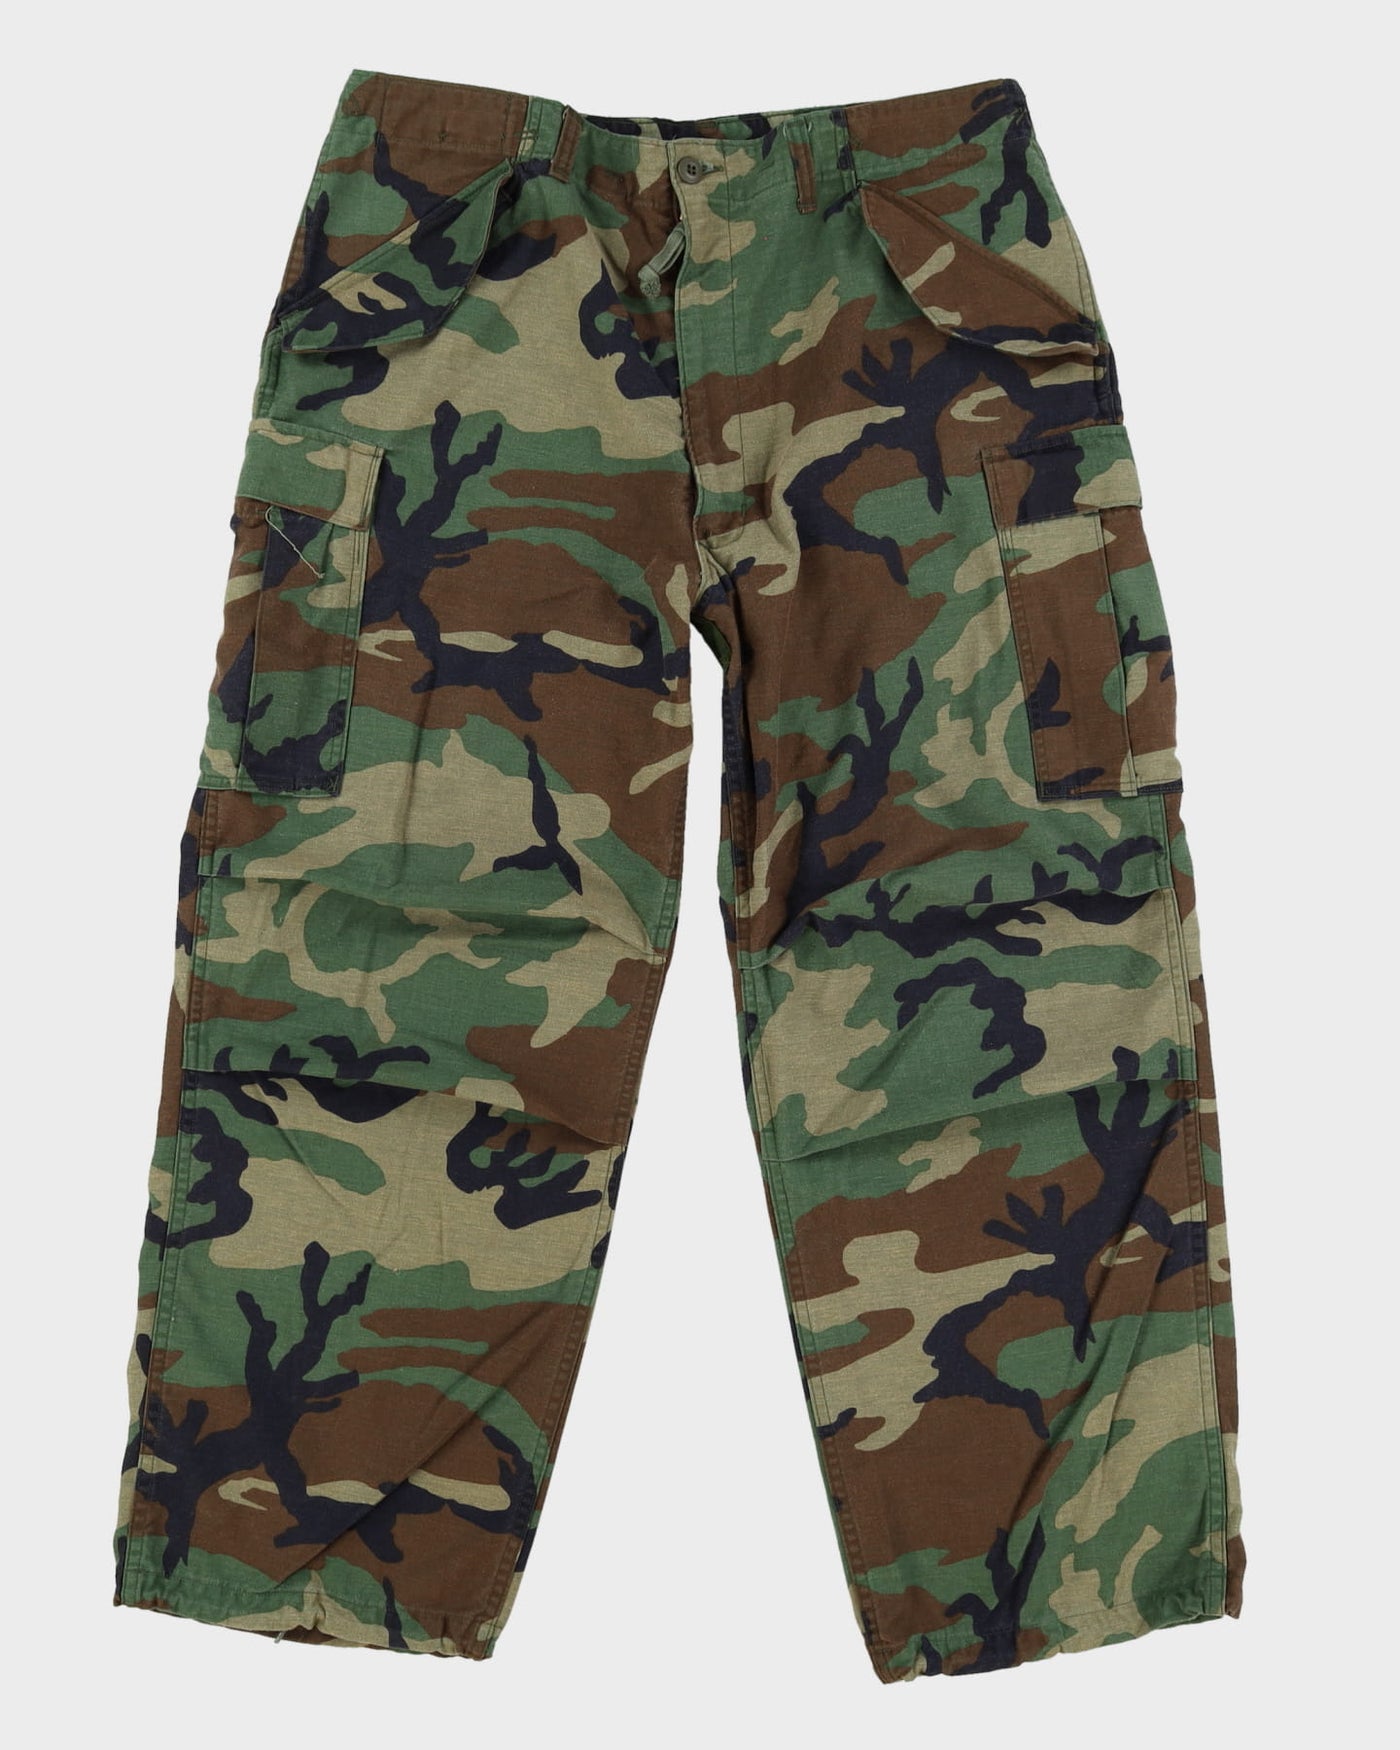 90s Vintage US Military Cold Weather Woodland Camo Trousers - 38x30